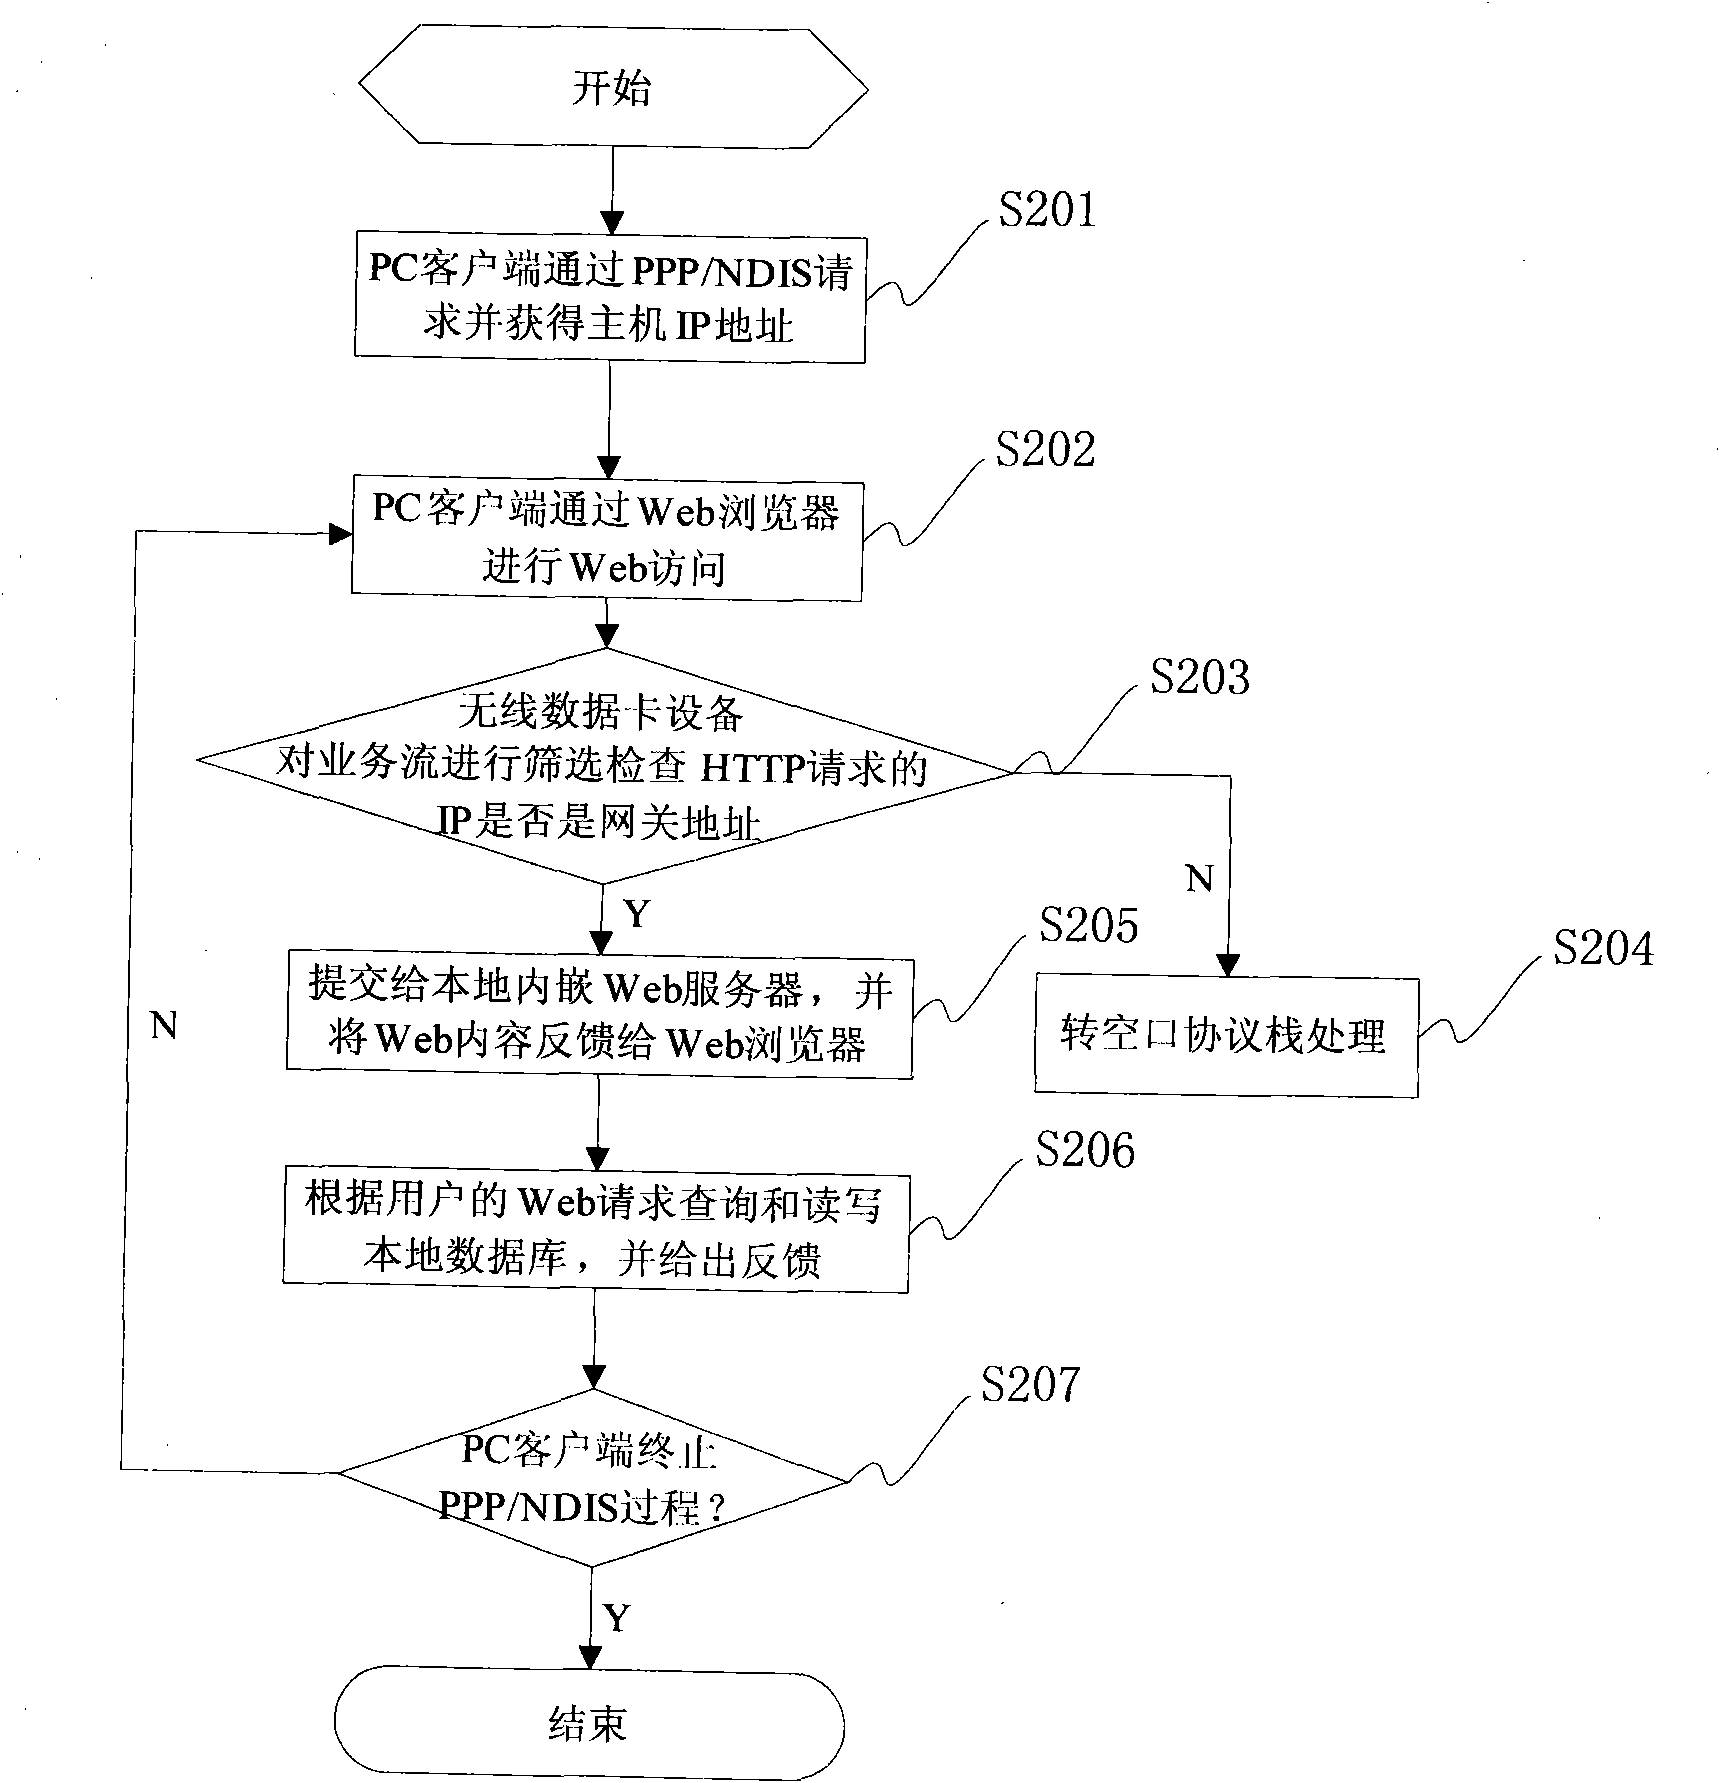 Web management-based wireless data card and implementation method thereof